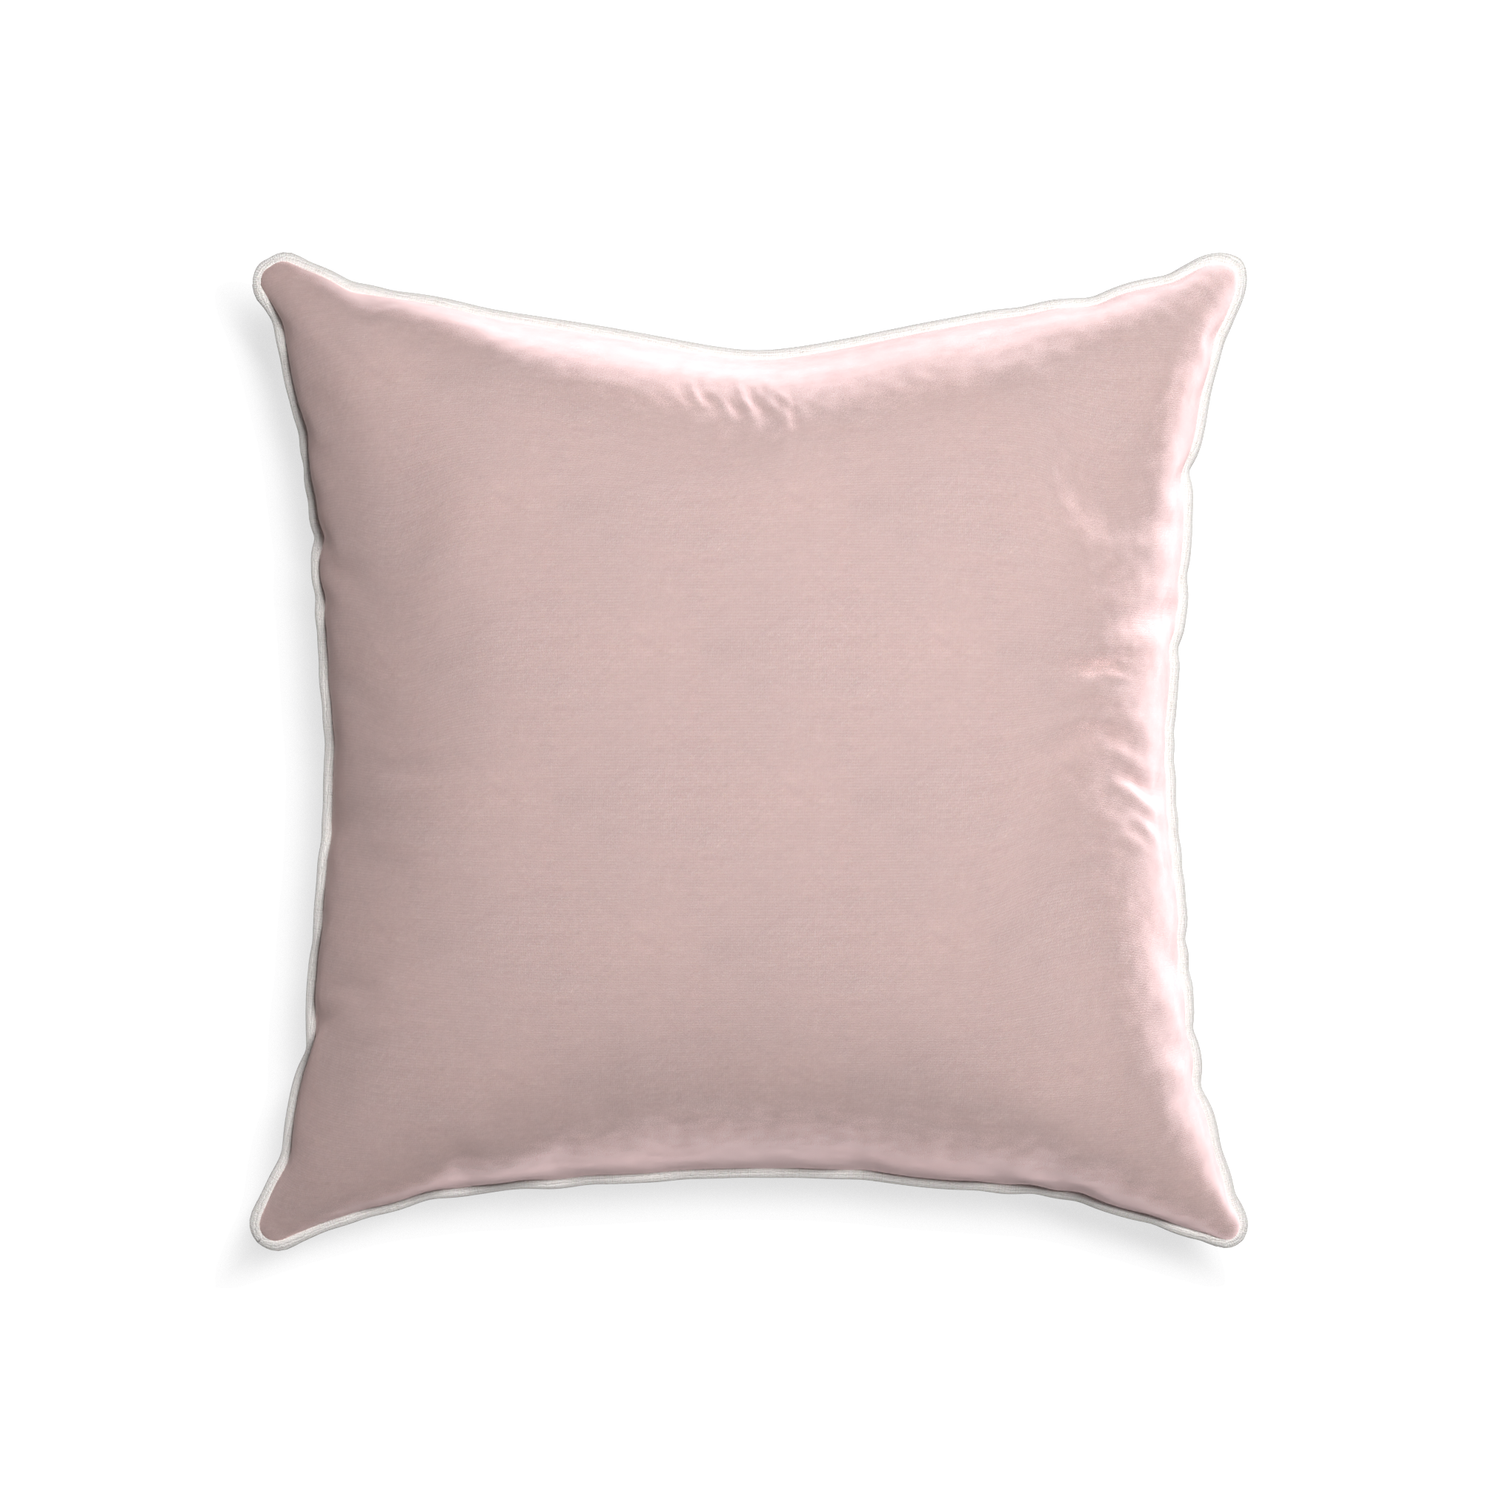 22-square rose velvet custom pillow with snow piping on white background